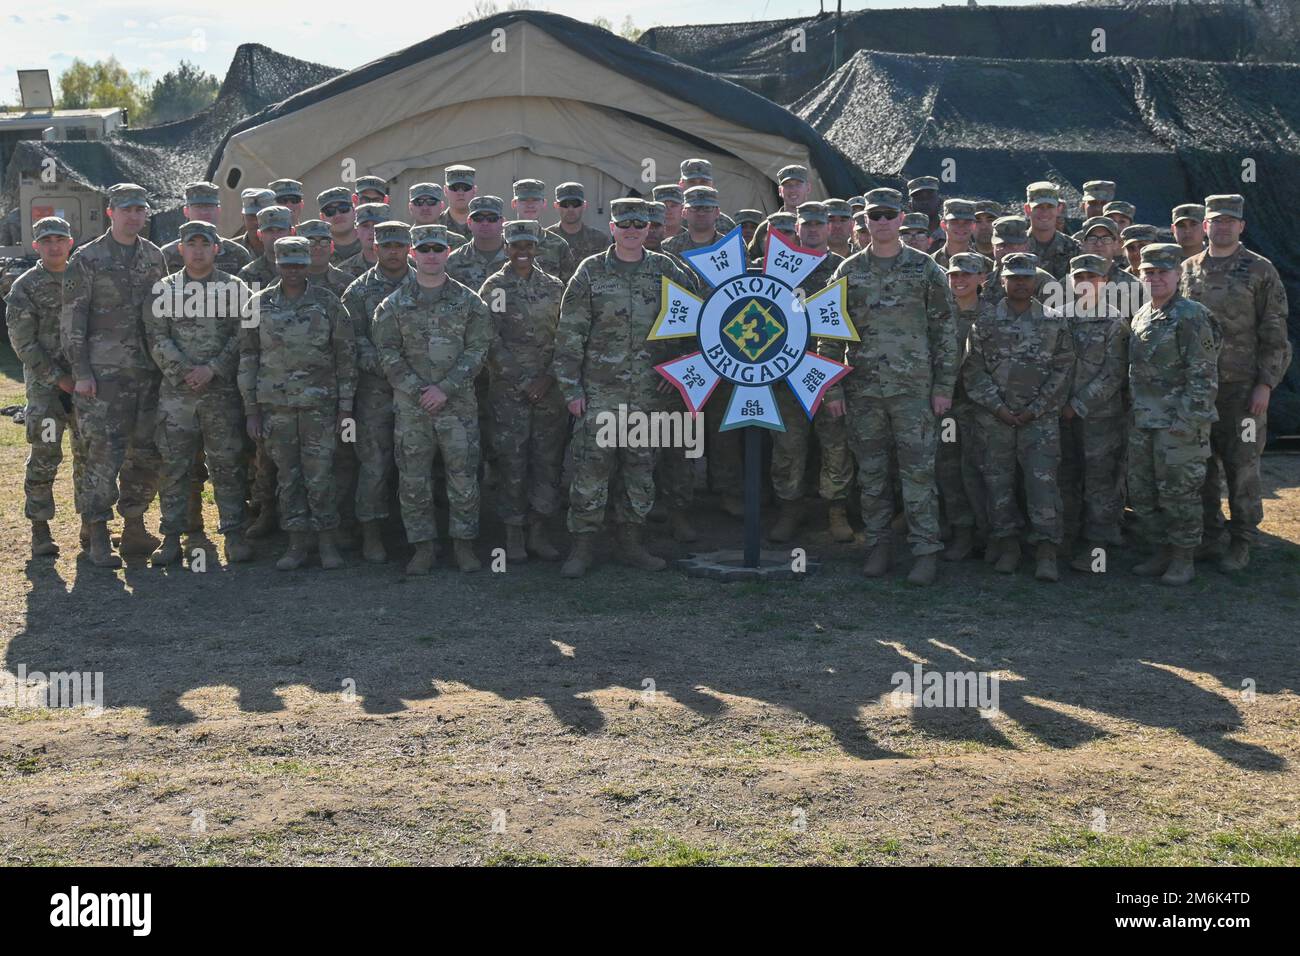 U.S. Soldiers assigned to the brigade staff of 3rd Armored Brigade Combat Team, 4th Infantry Division (3/4 ABCT) pose after concluding a brigade command post exercise, Drawsko Pomorskie, Poland, April 30, 2022. The 3/4 ABCT is among other units assigned to V Corps, America’s forward-deployed corps in Europe that works alongside NATO allies and regional security partners to provide combat-credible forces. Stock Photo